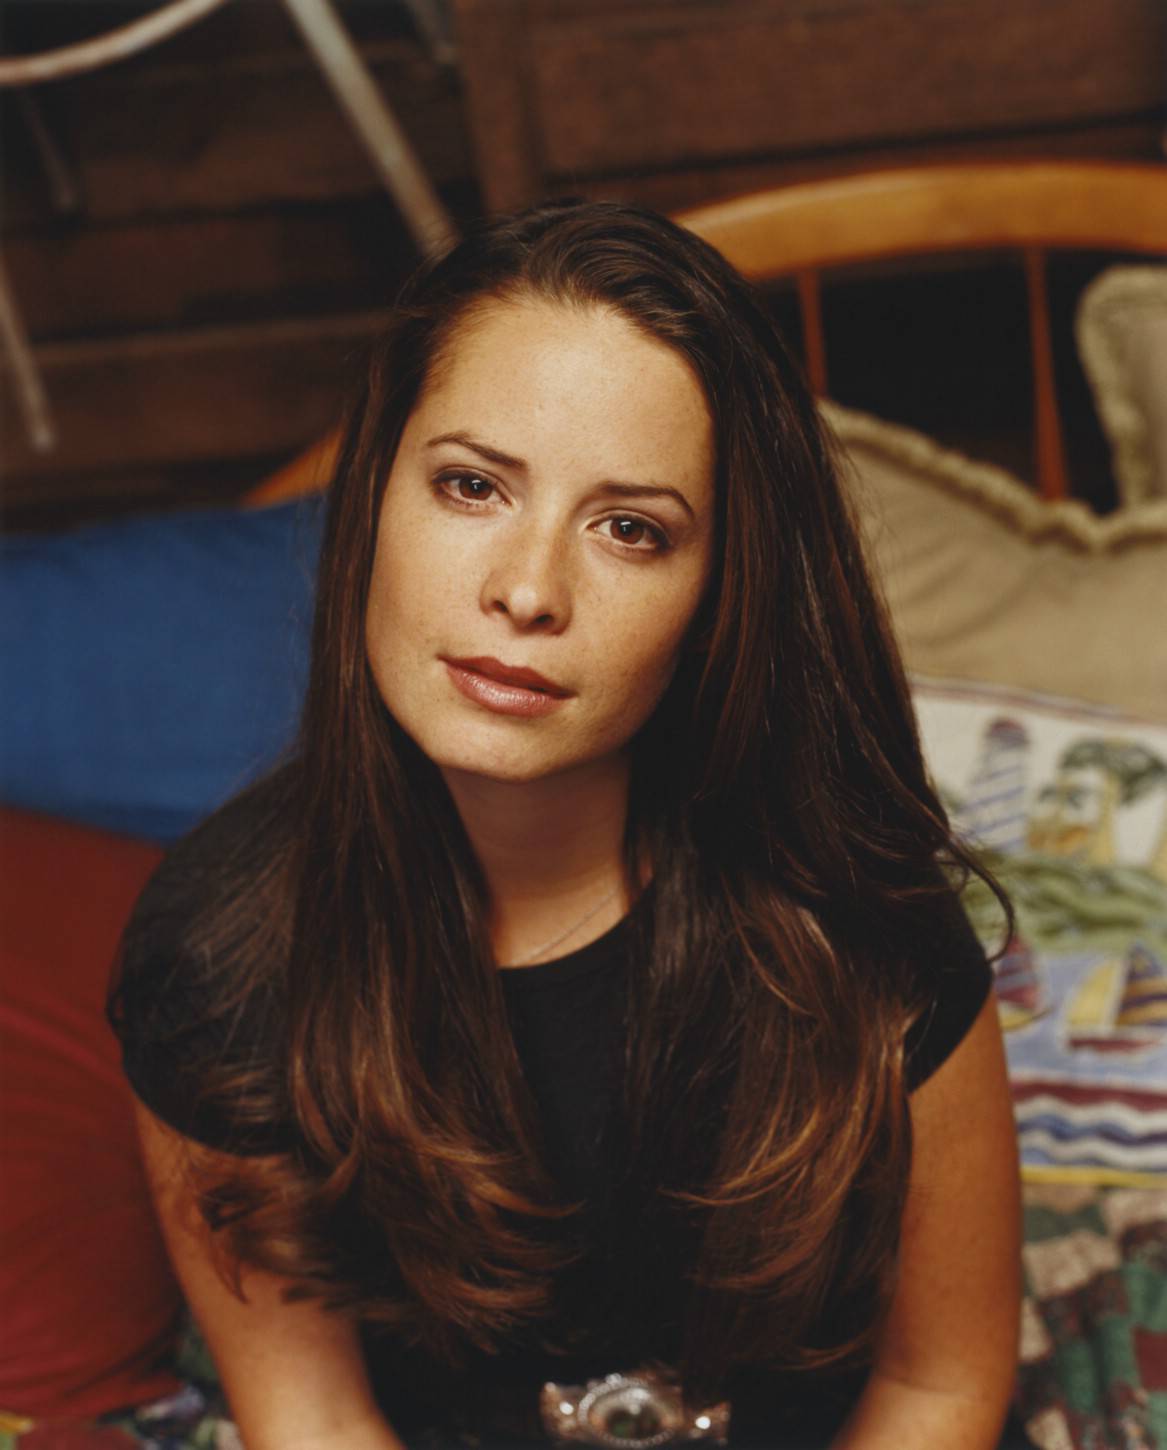 Holly Marie Combs - Holly Marie Combs Photo (38410618) - Fanpop